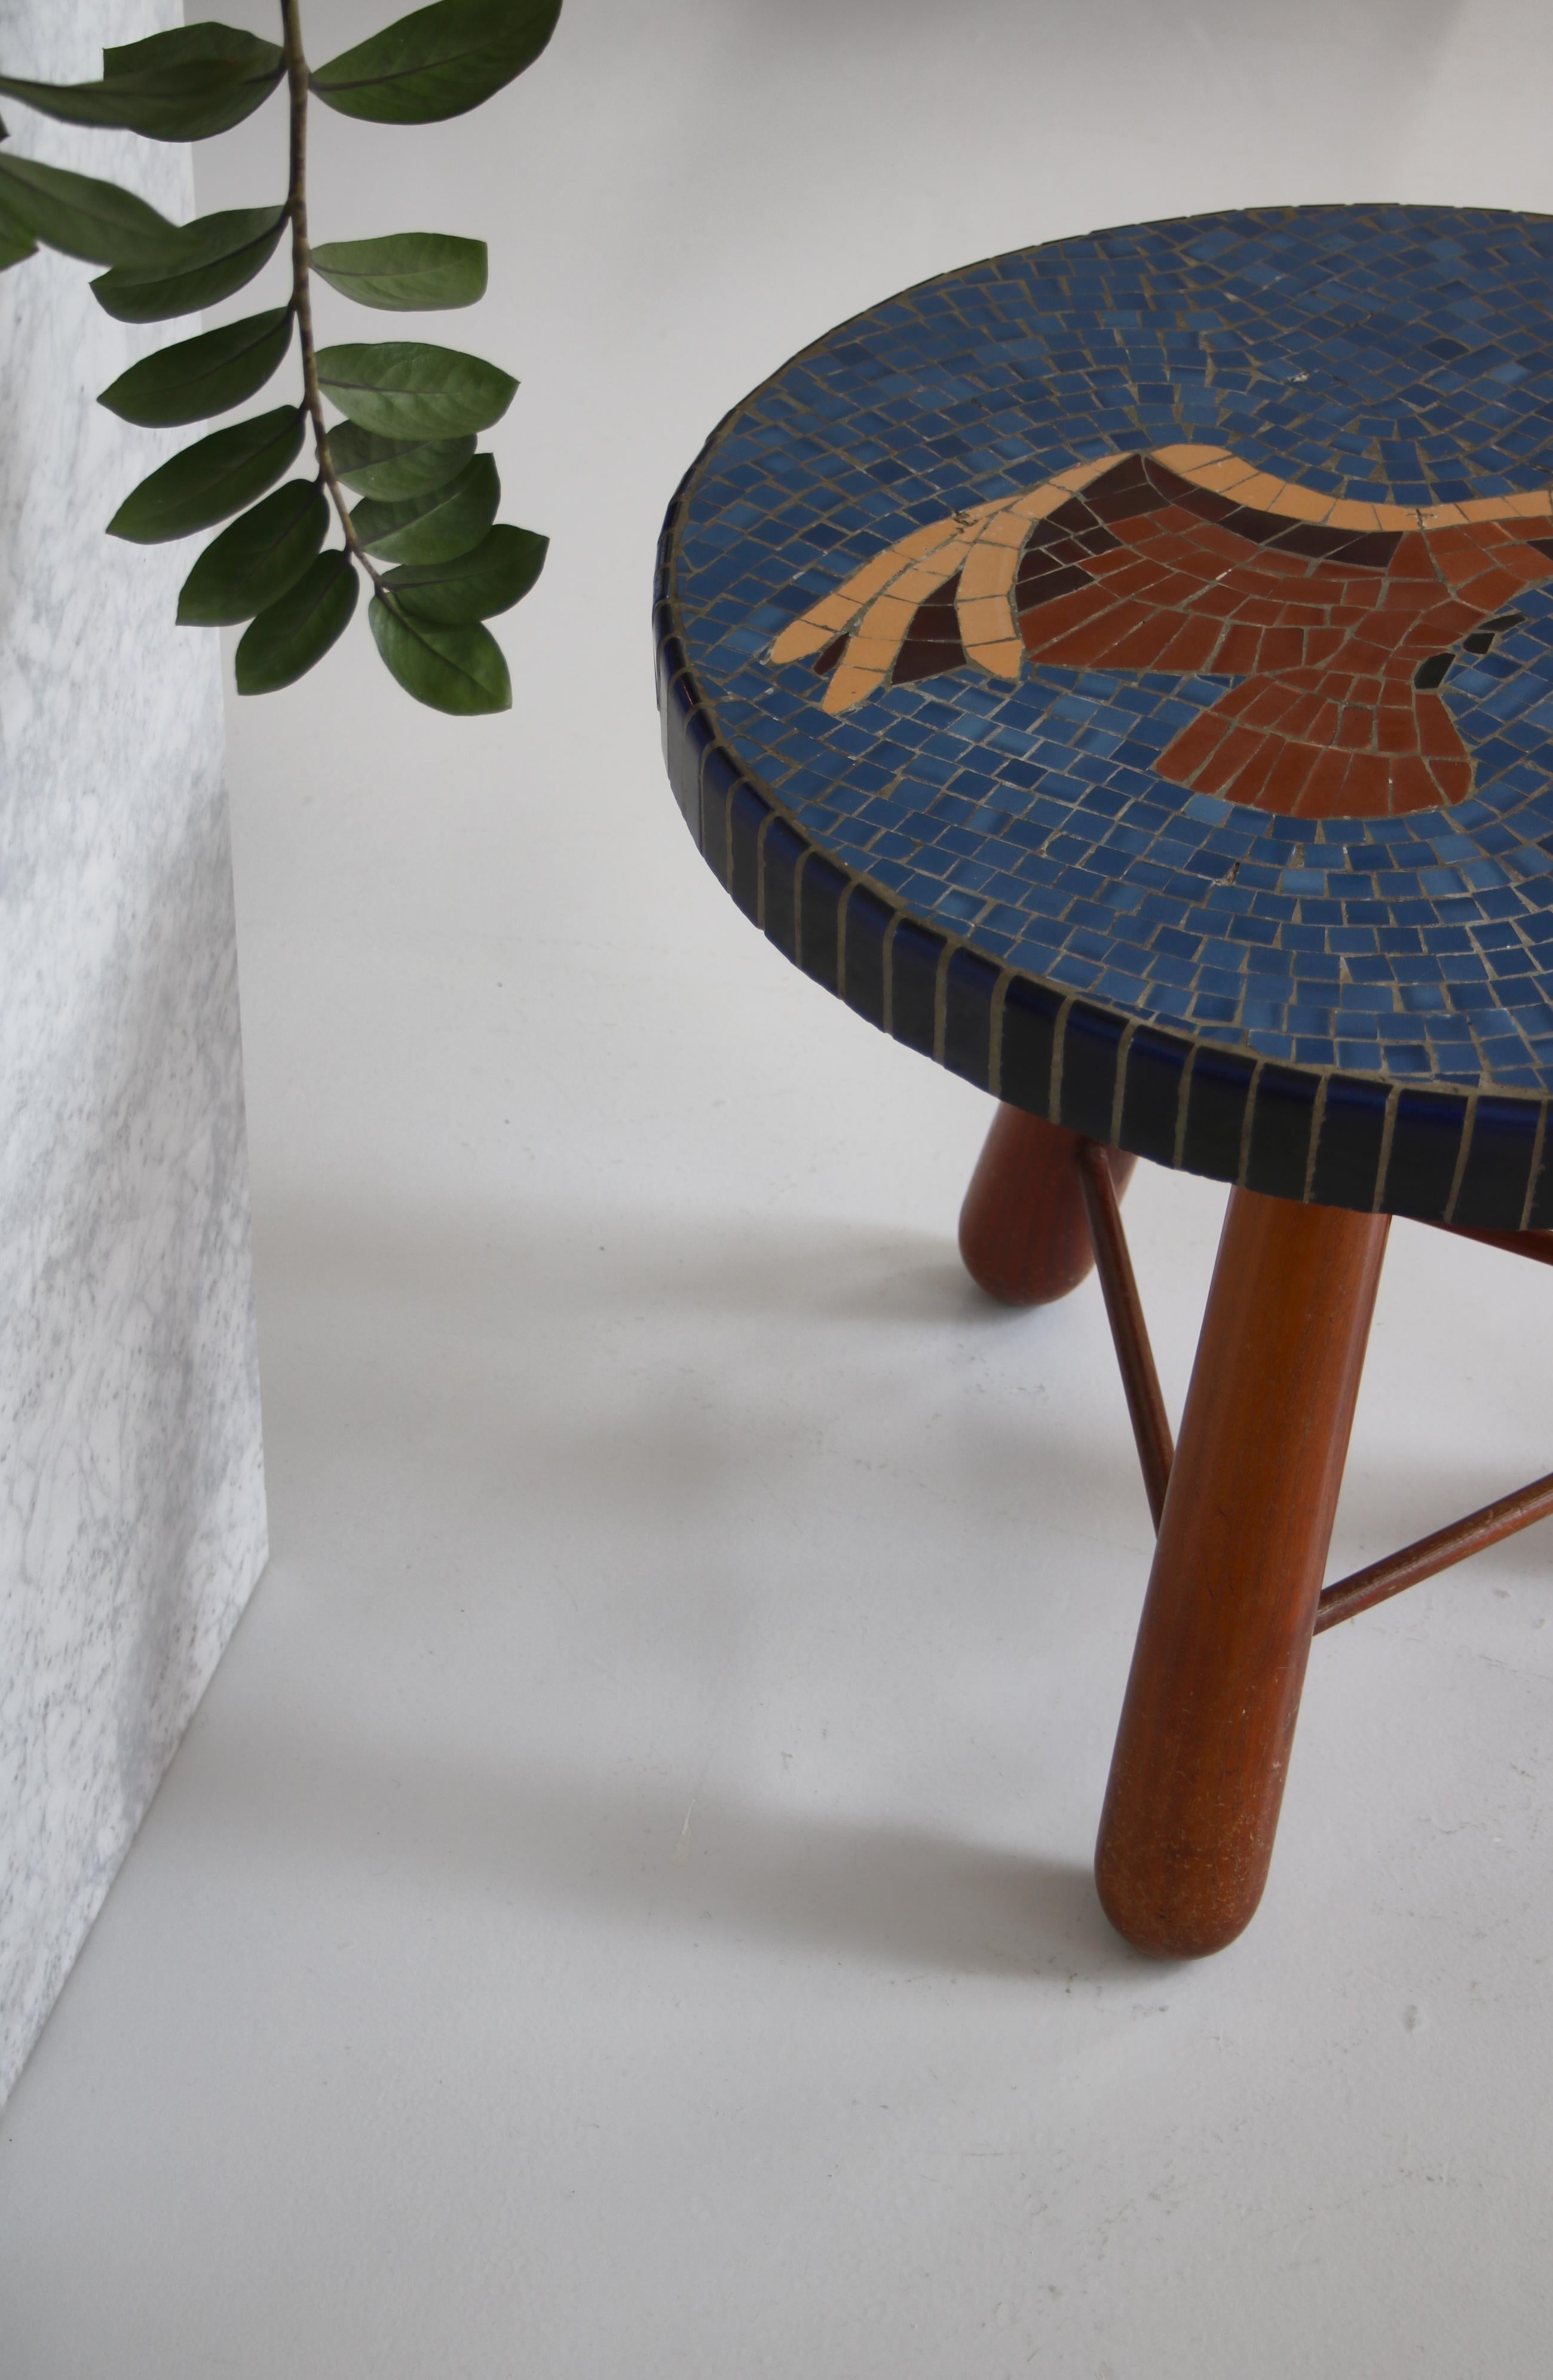 Round side Table, Otto Færge in Stained Elm & Blue Mosaic Tiles, Denmark, 1940 In Good Condition For Sale In Odense, DK